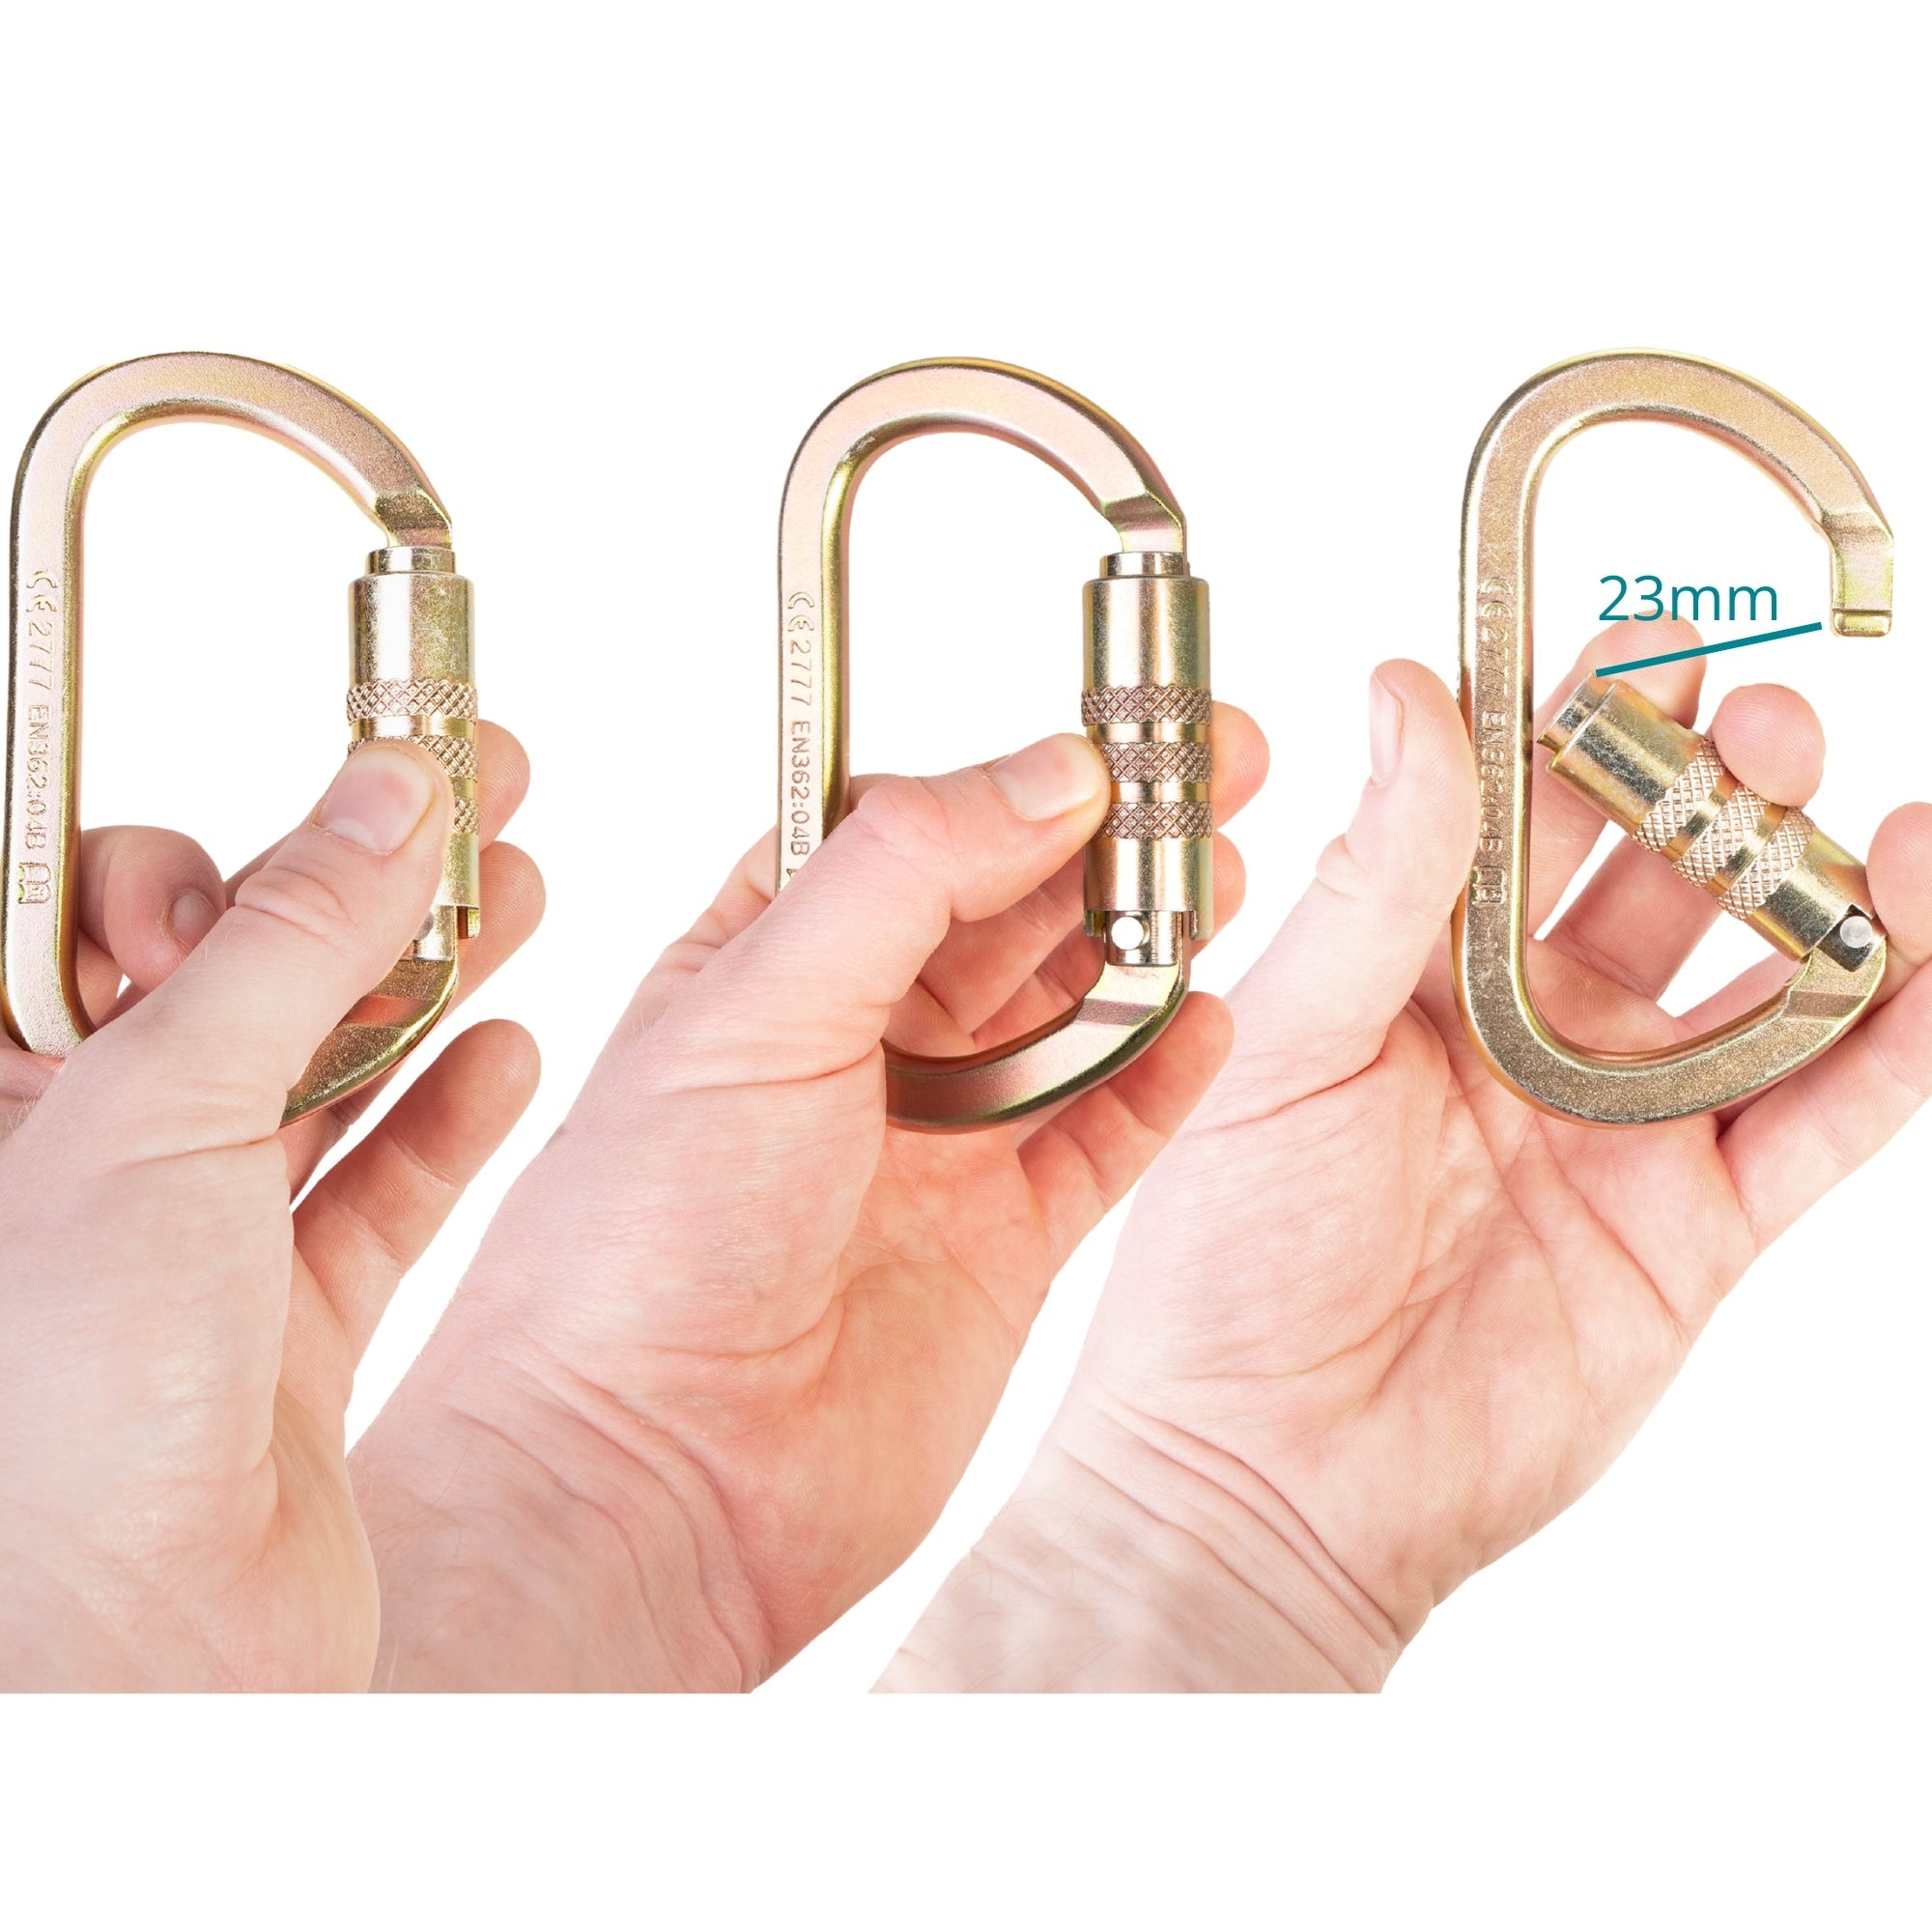 offset oval carabiner opening and gate measurement